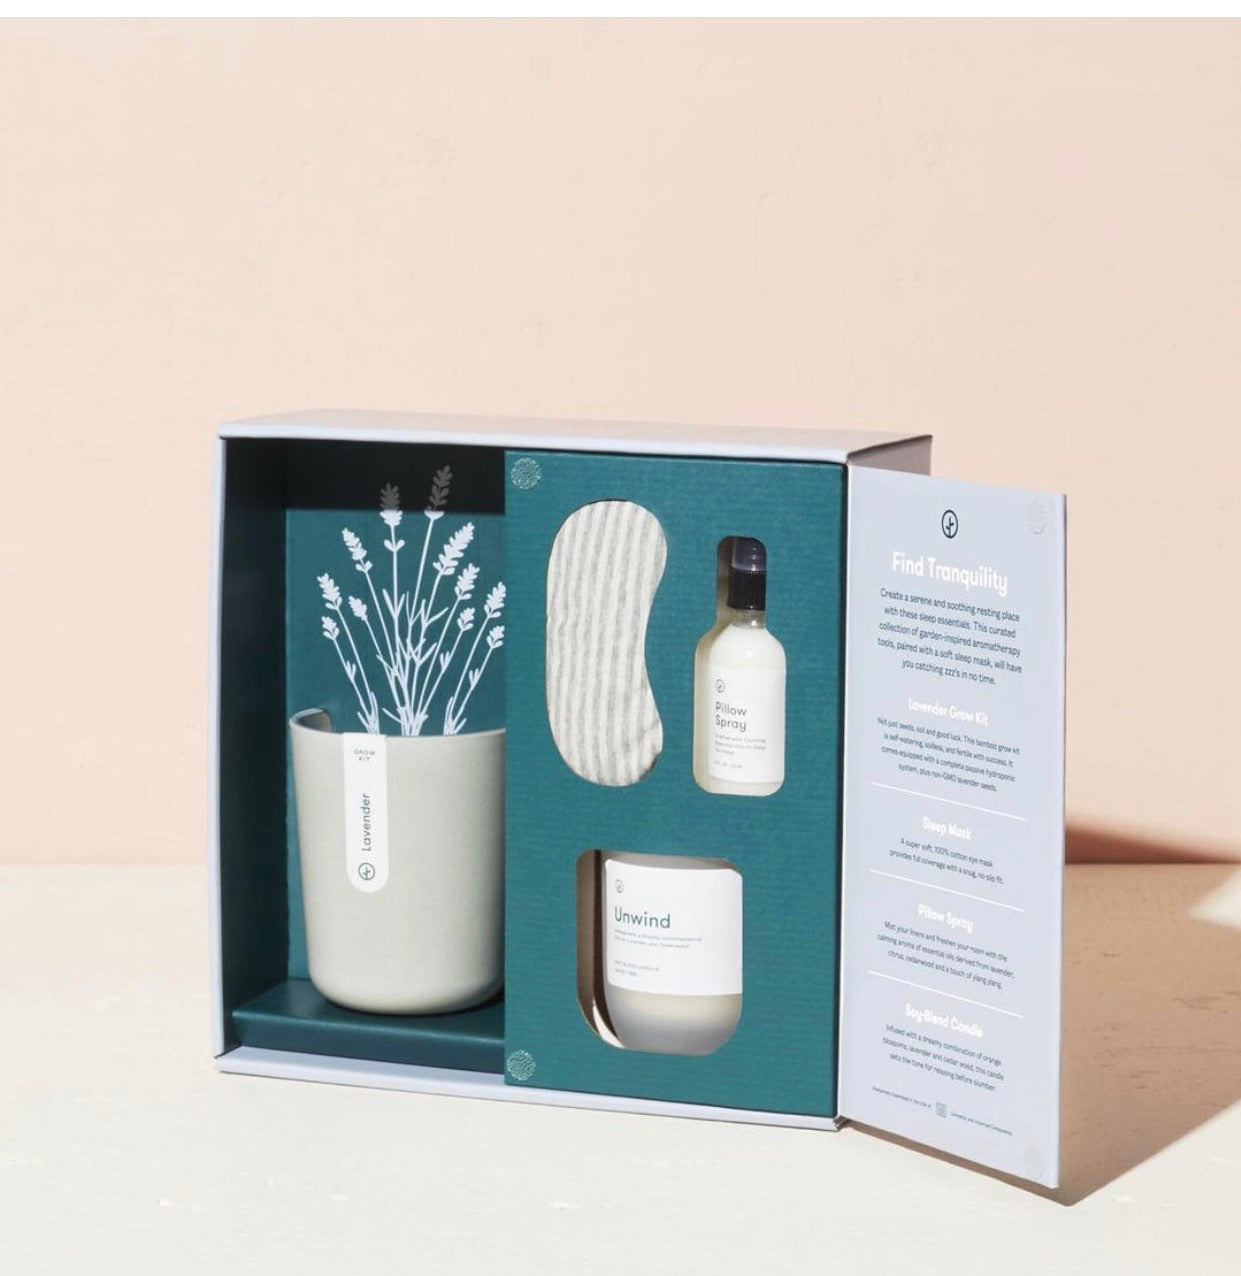 Modern Sprout Gift Set